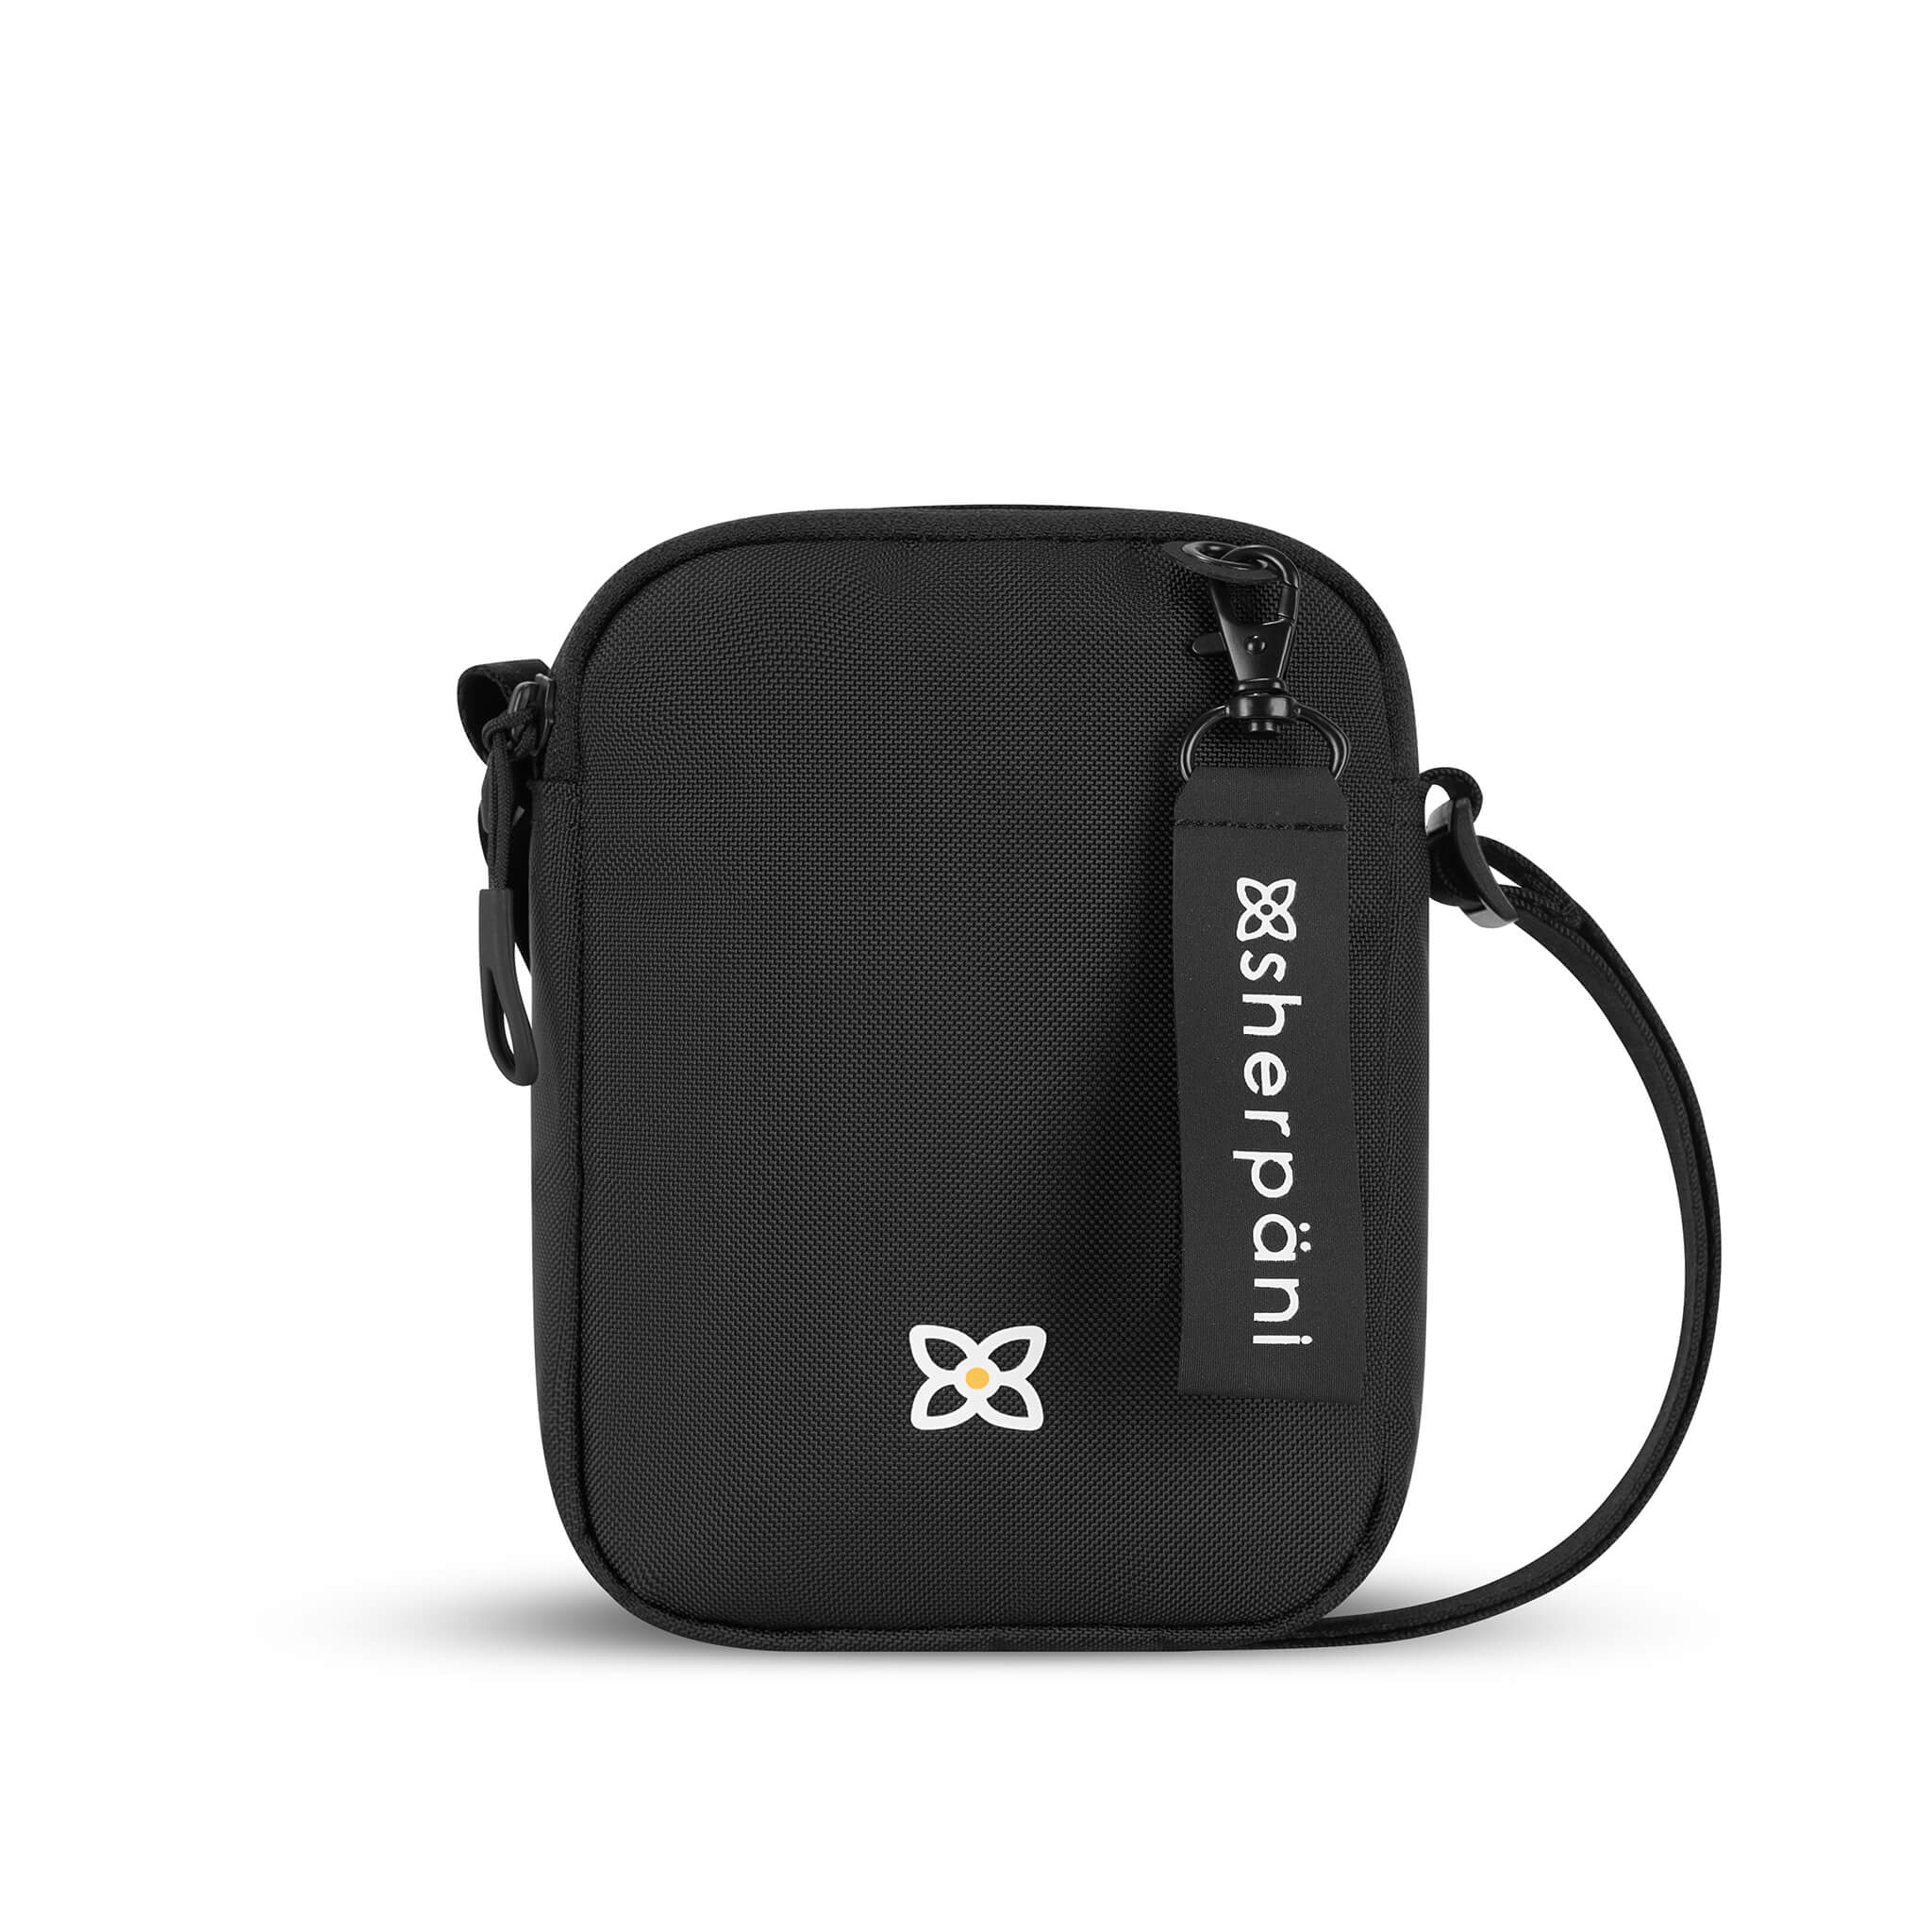 Flat front view of Sherpani mini crossbody purse, the Rogue in Raven. Rogue features include an adjustable crossbody strap, detachable keychain, compact design, minimalist bag, RFID protection and back slip pocket. The Raven color is true black with Sherpani edelweiss logo accented in white. 